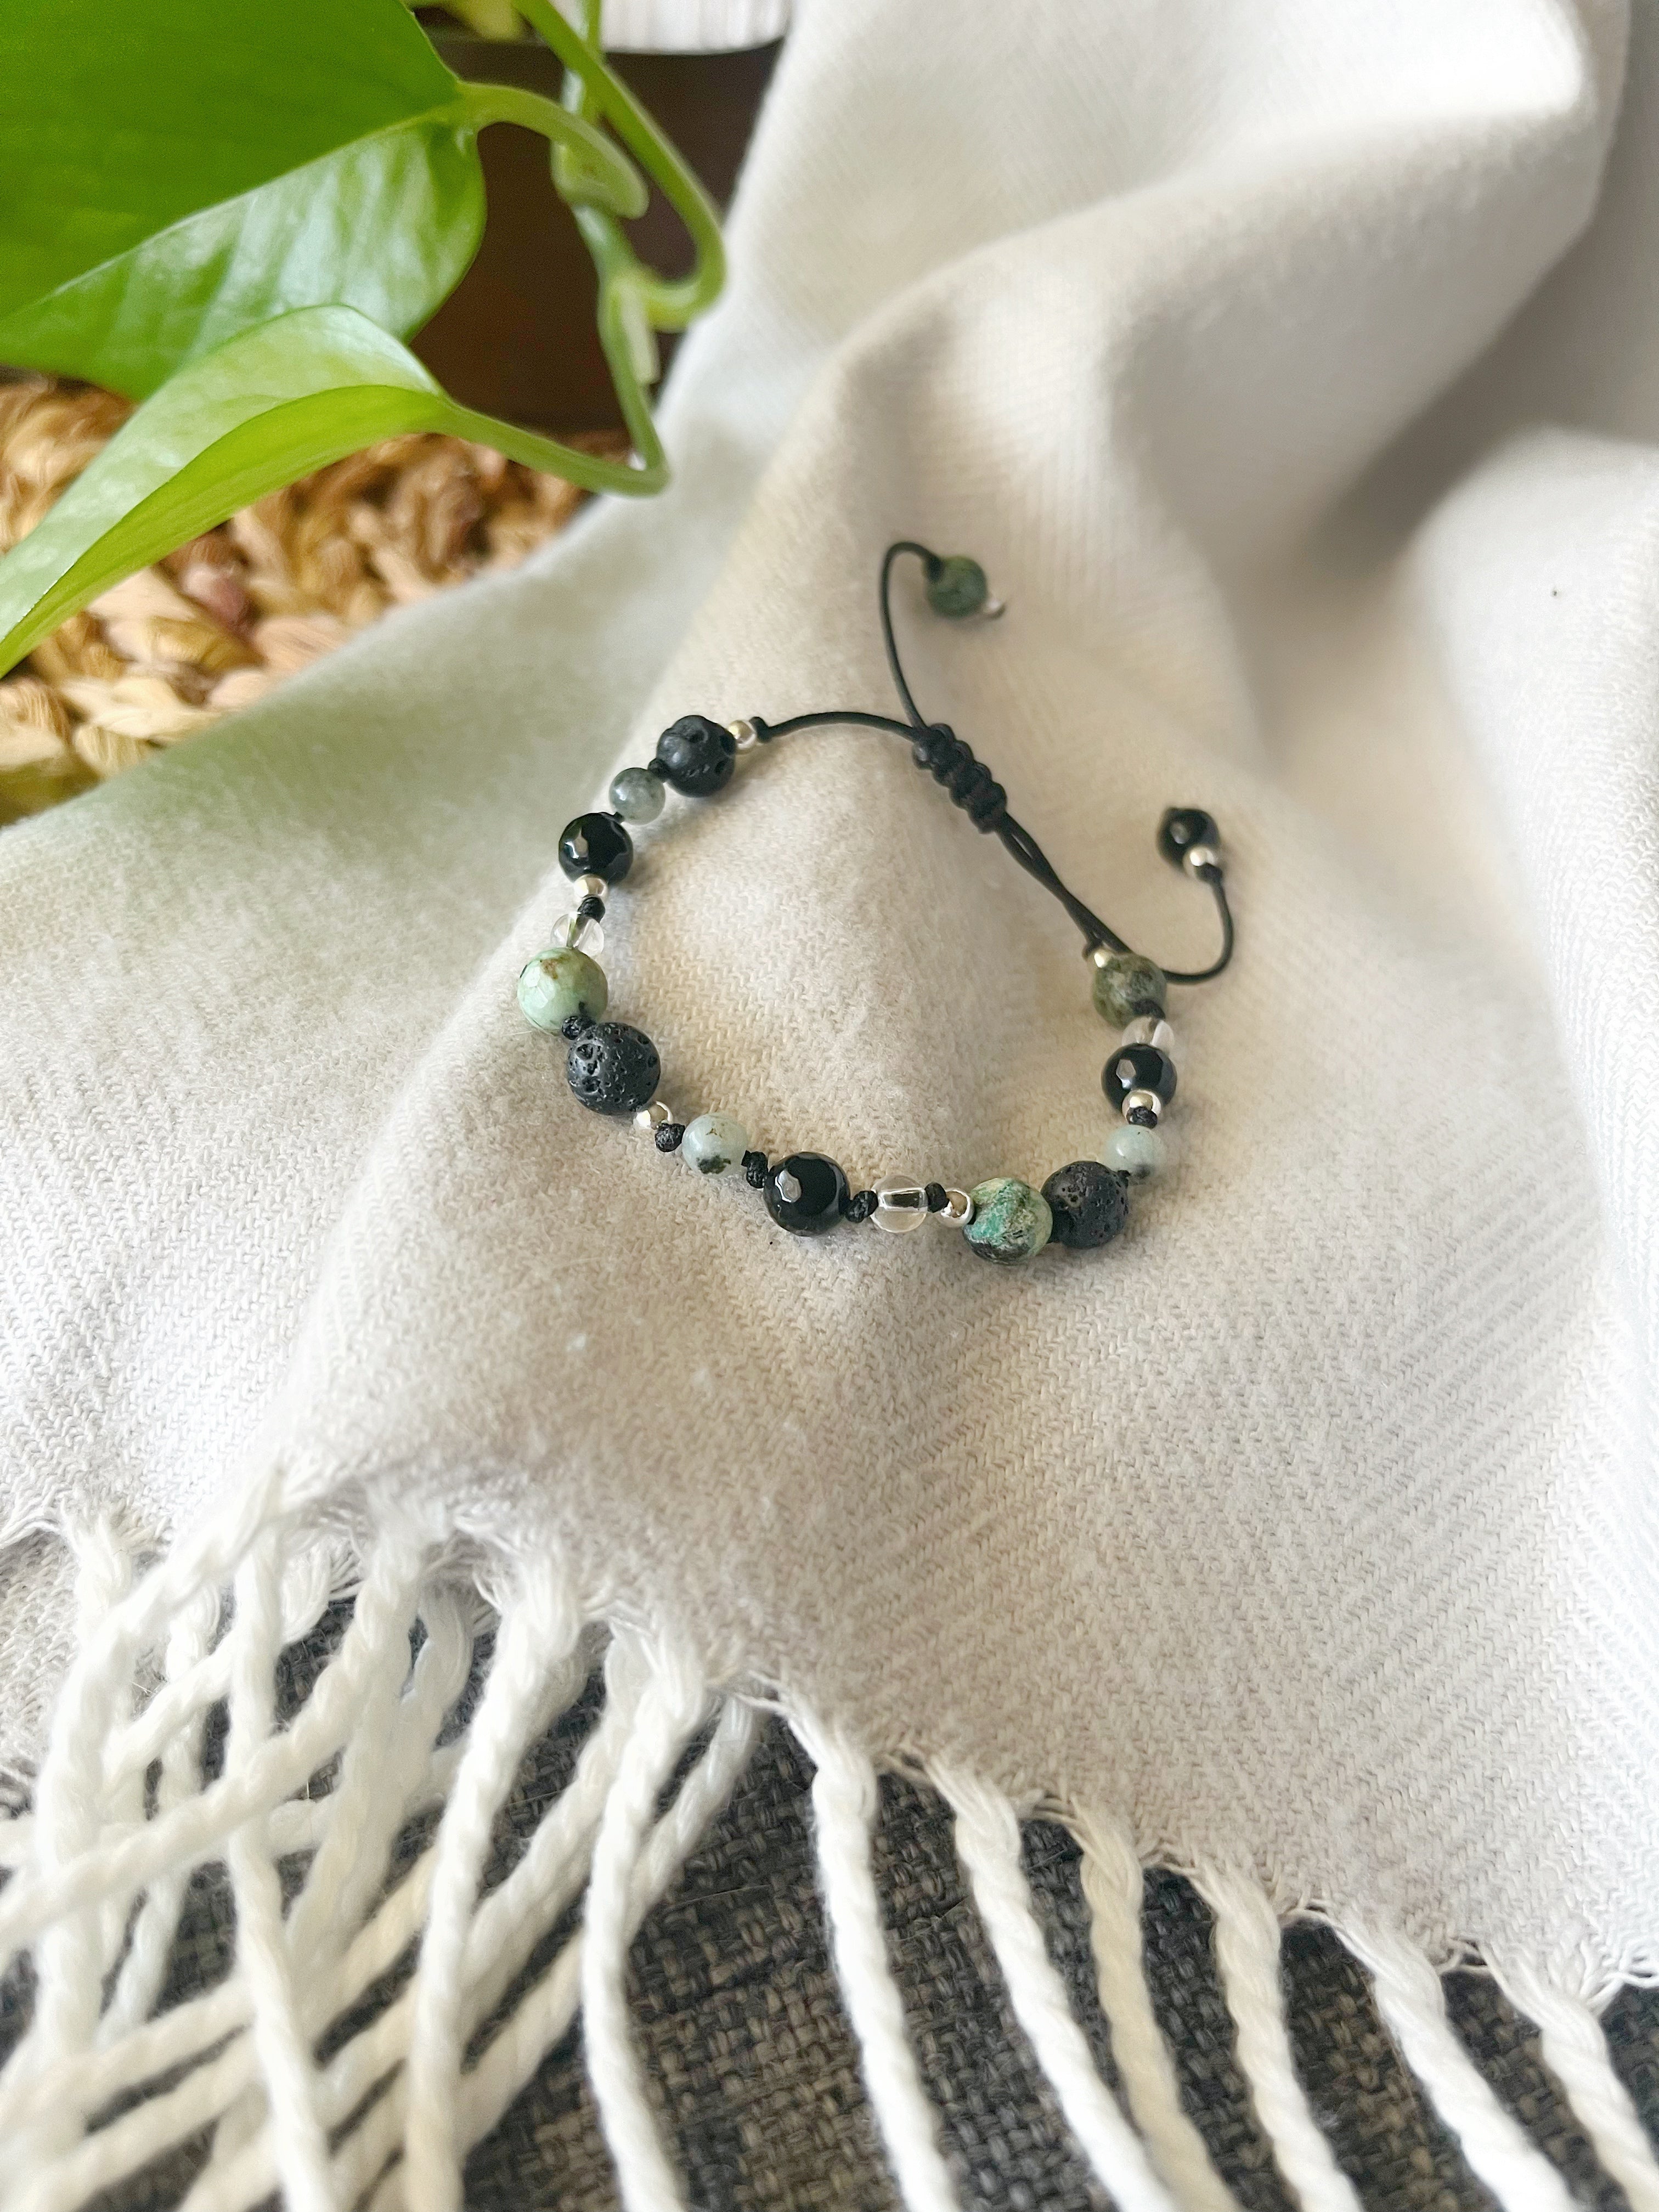 African Turquoise “Skinny” Diffuser Bracelet